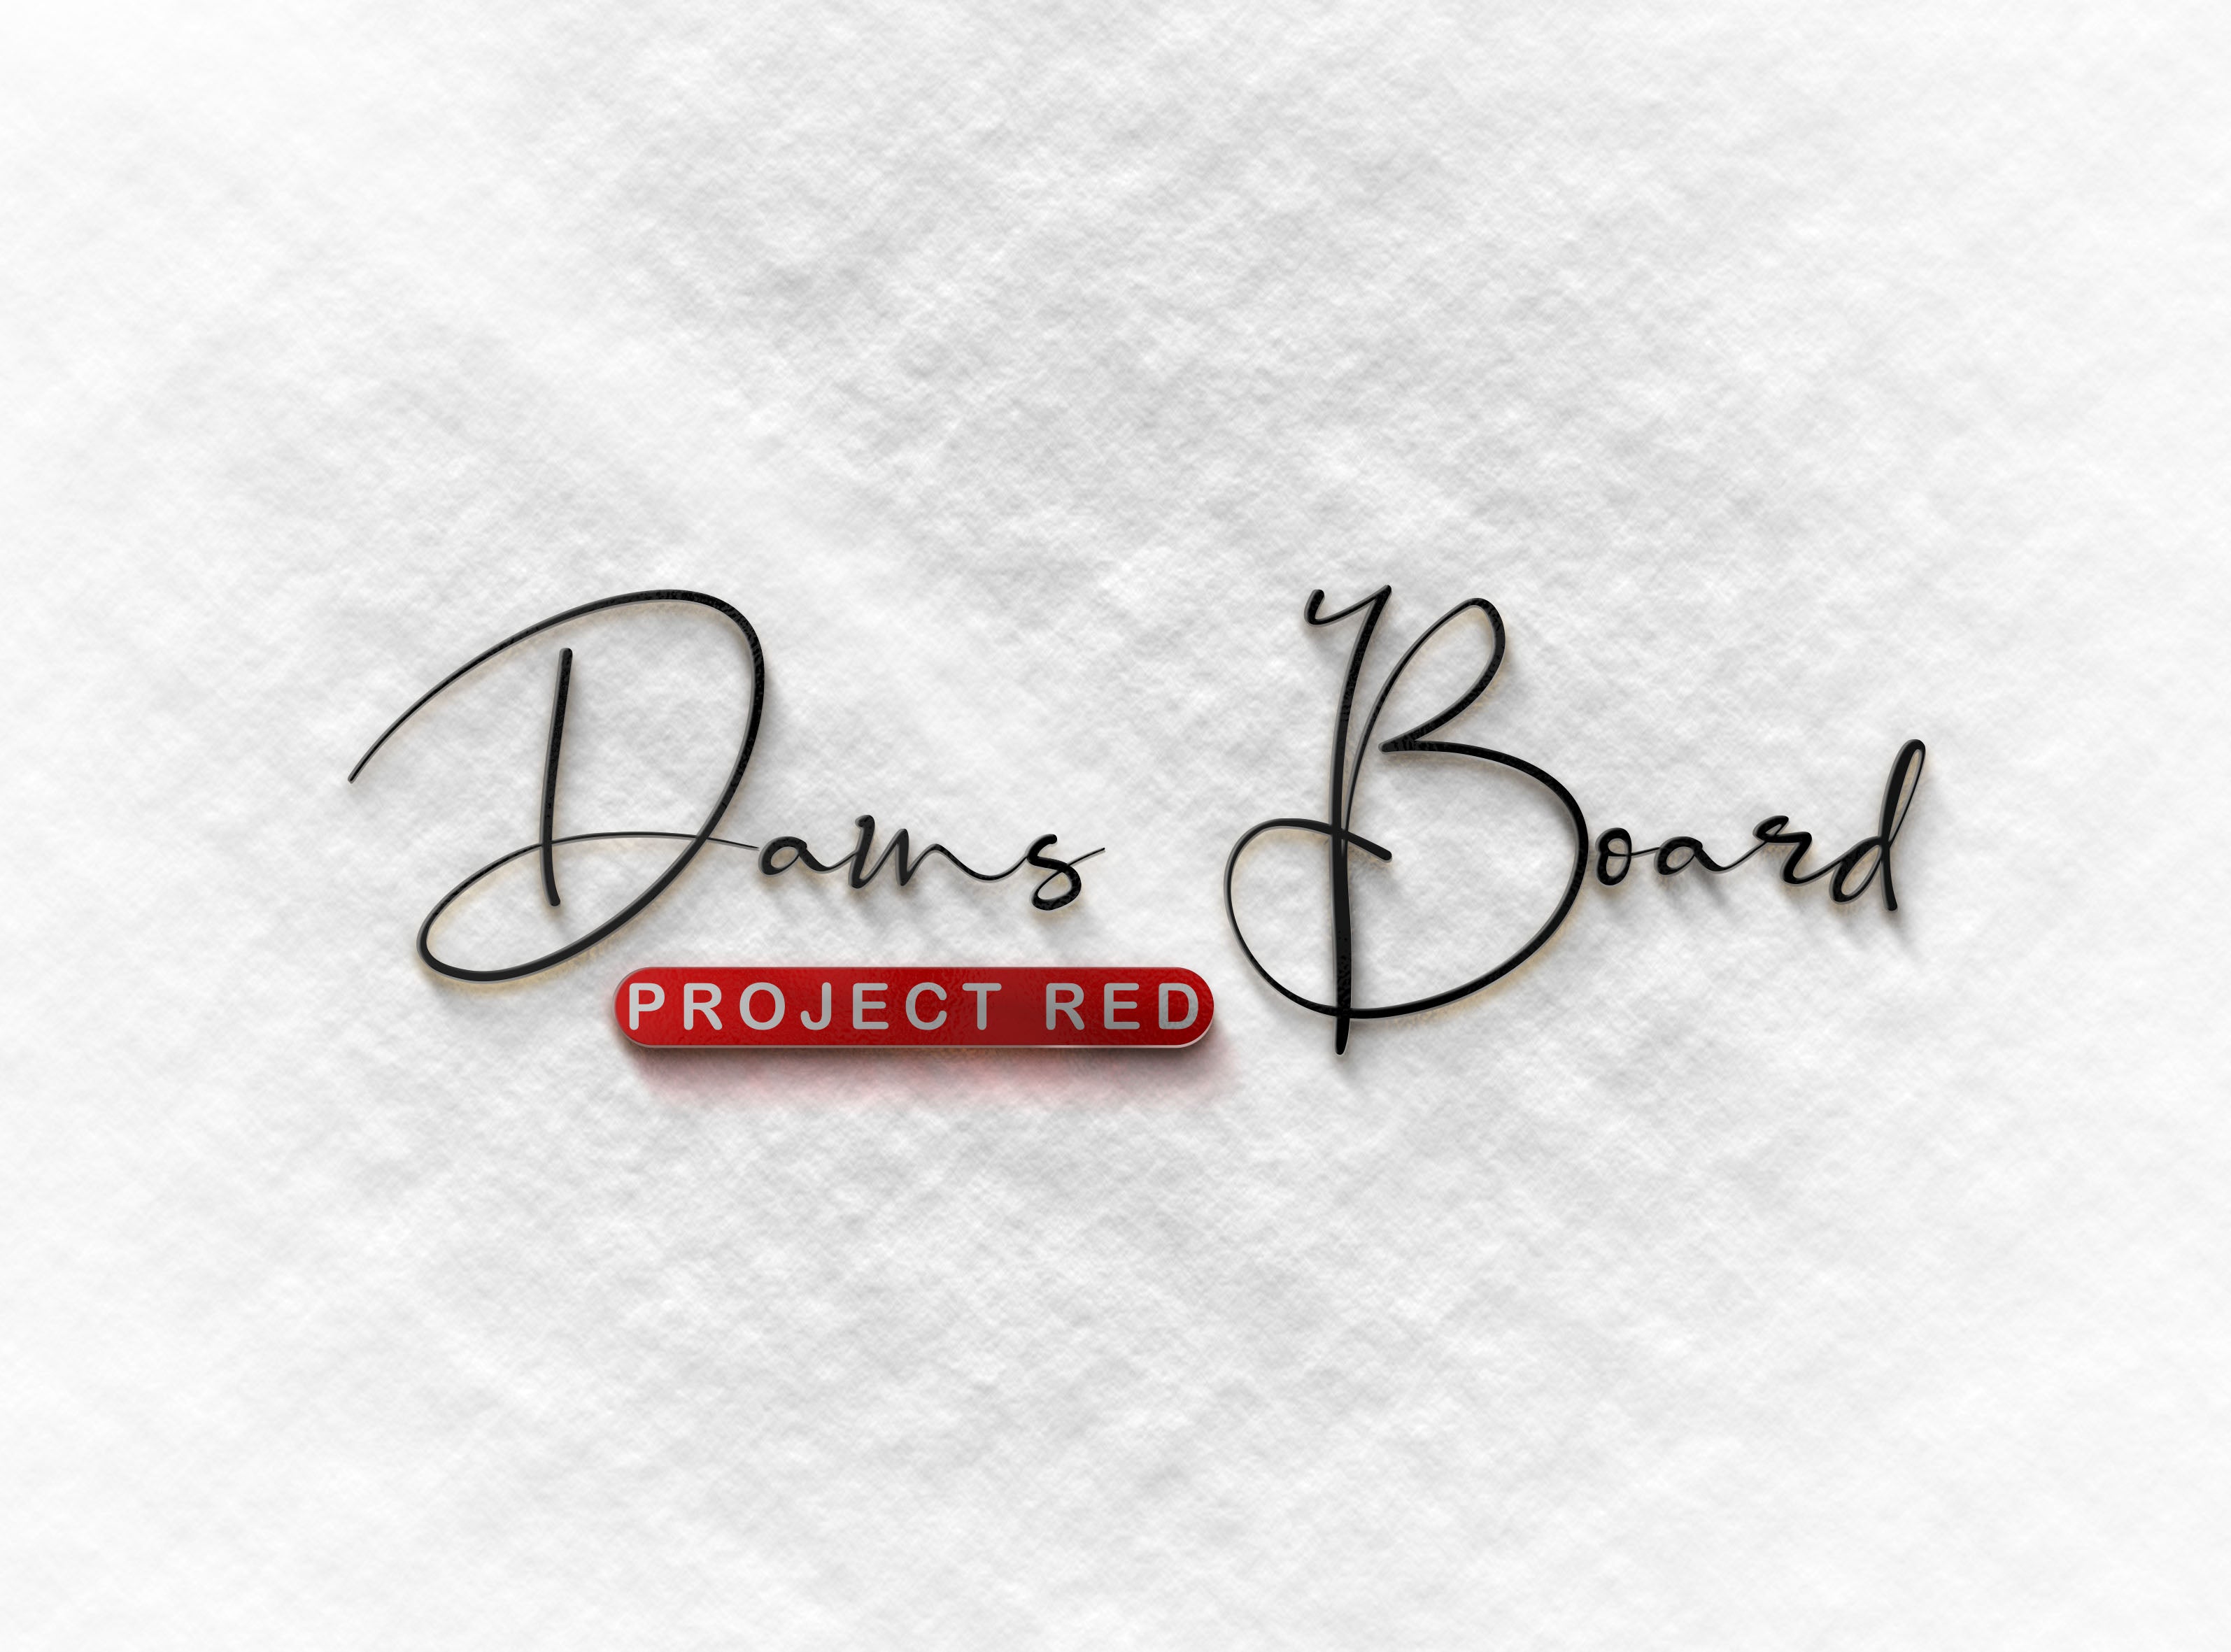 Balance Board - Dans Board Project Red review